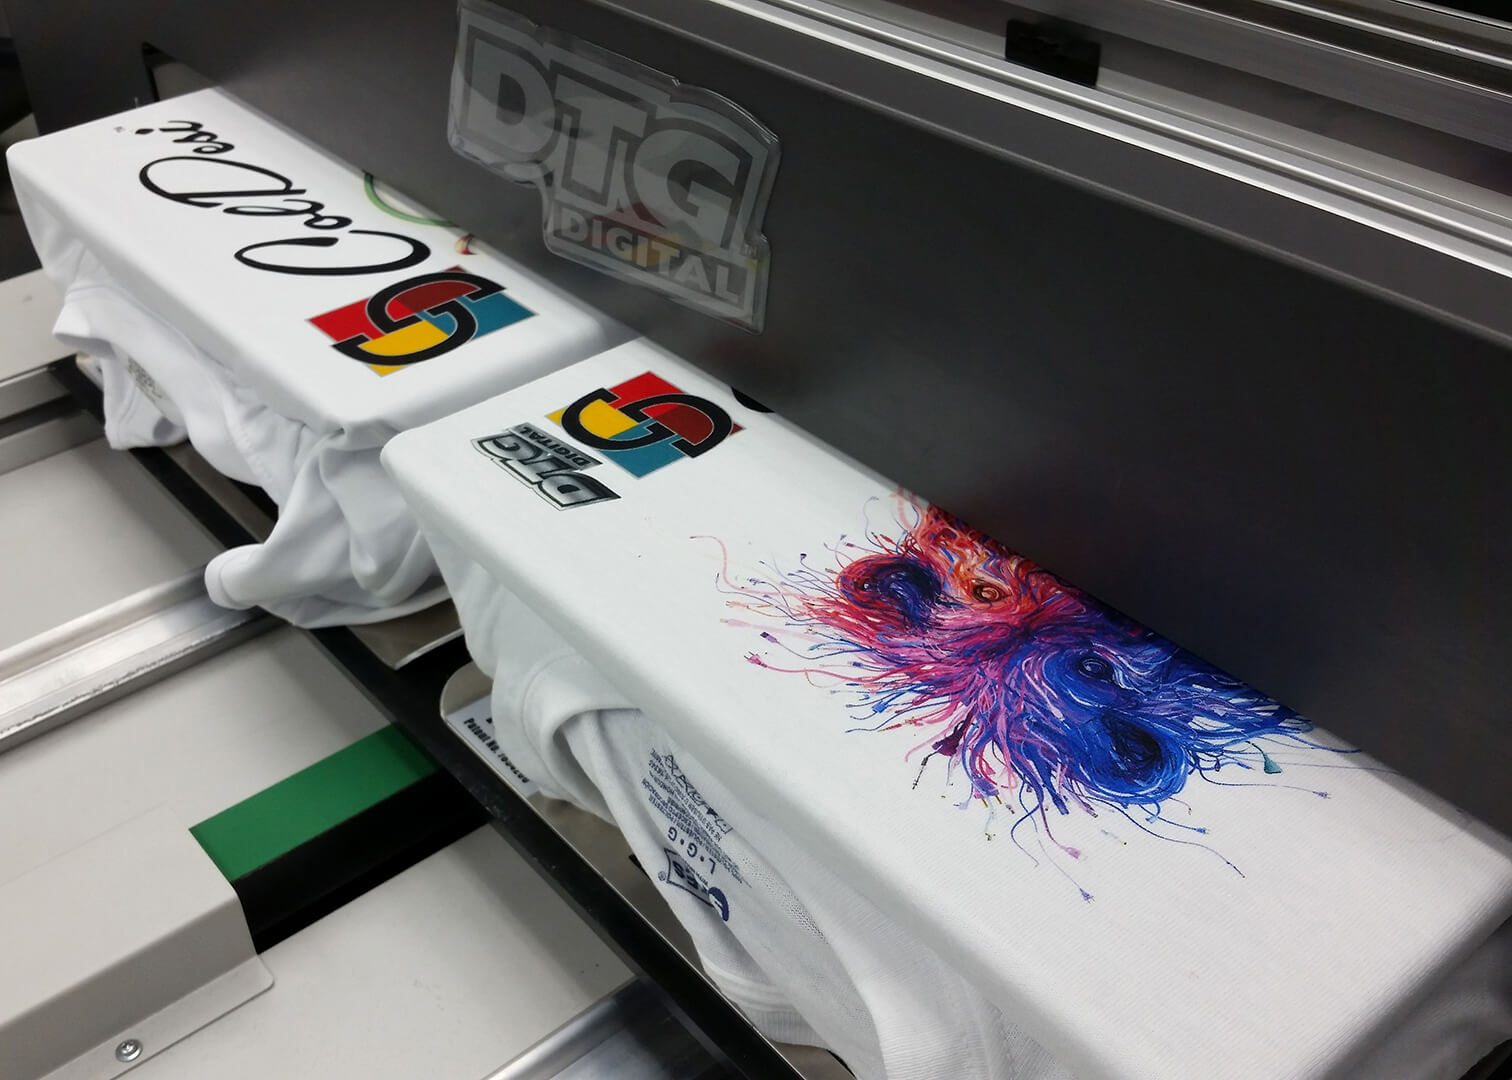 Wholesale Screen Printing in New Haven, Connecticut